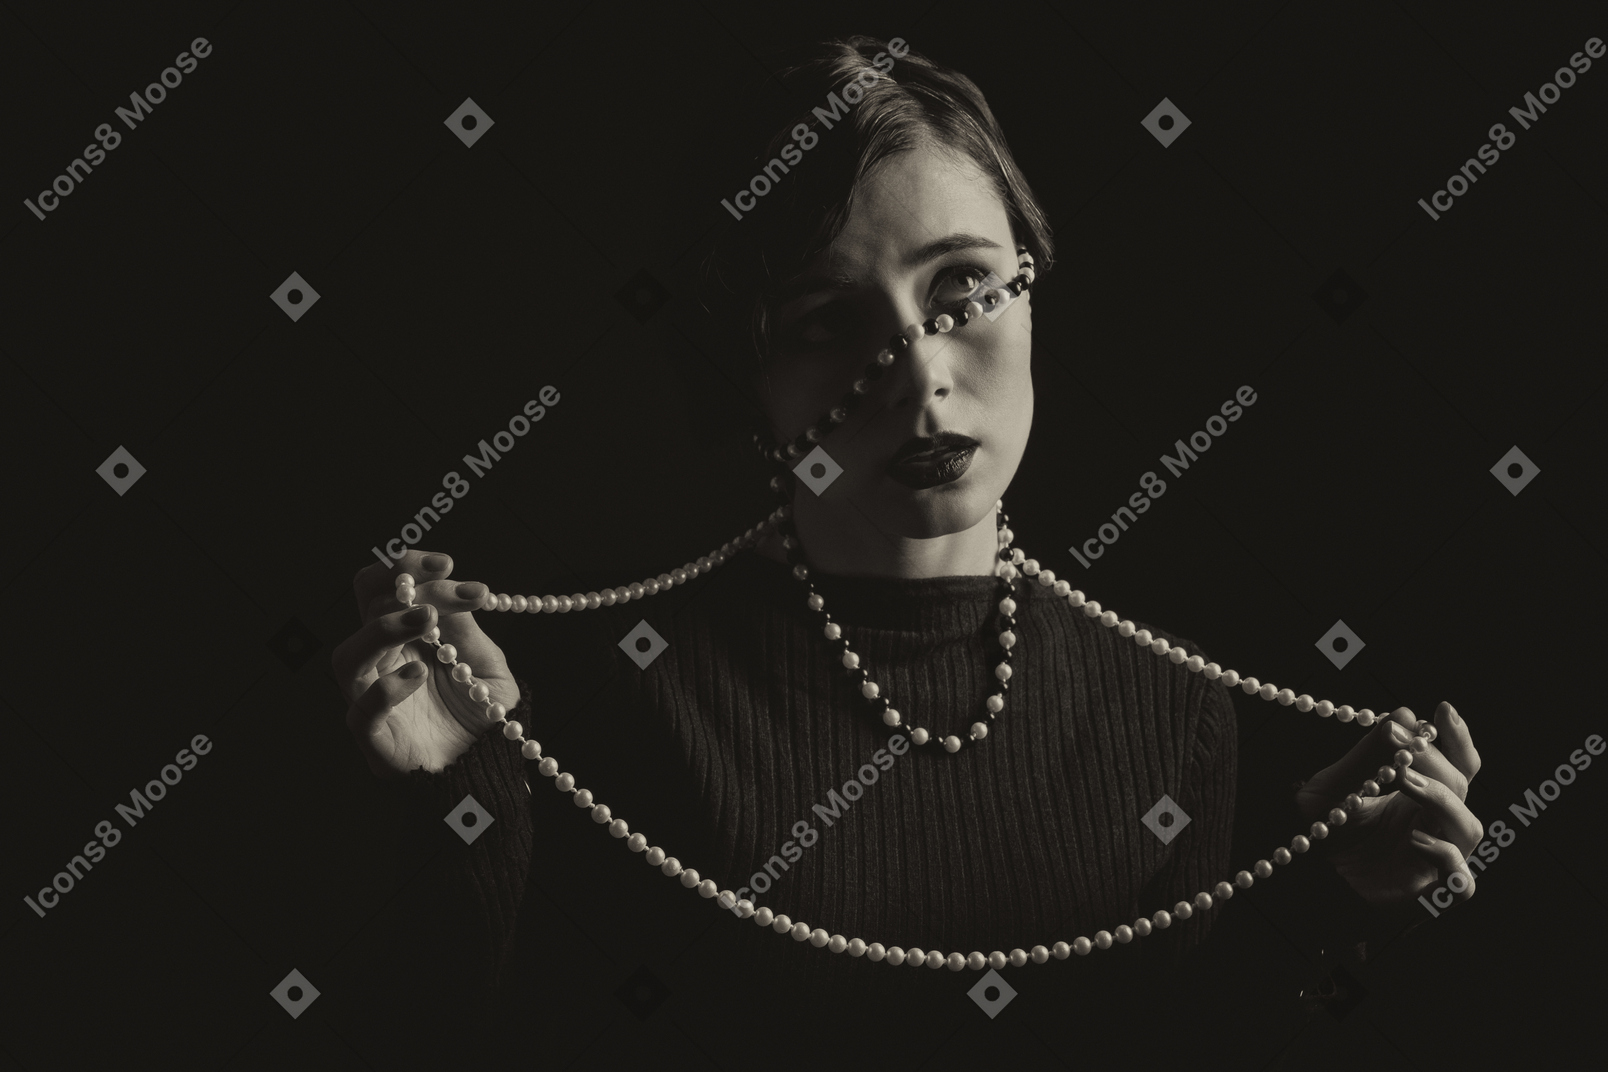 Woman in the dark wrapped in beads